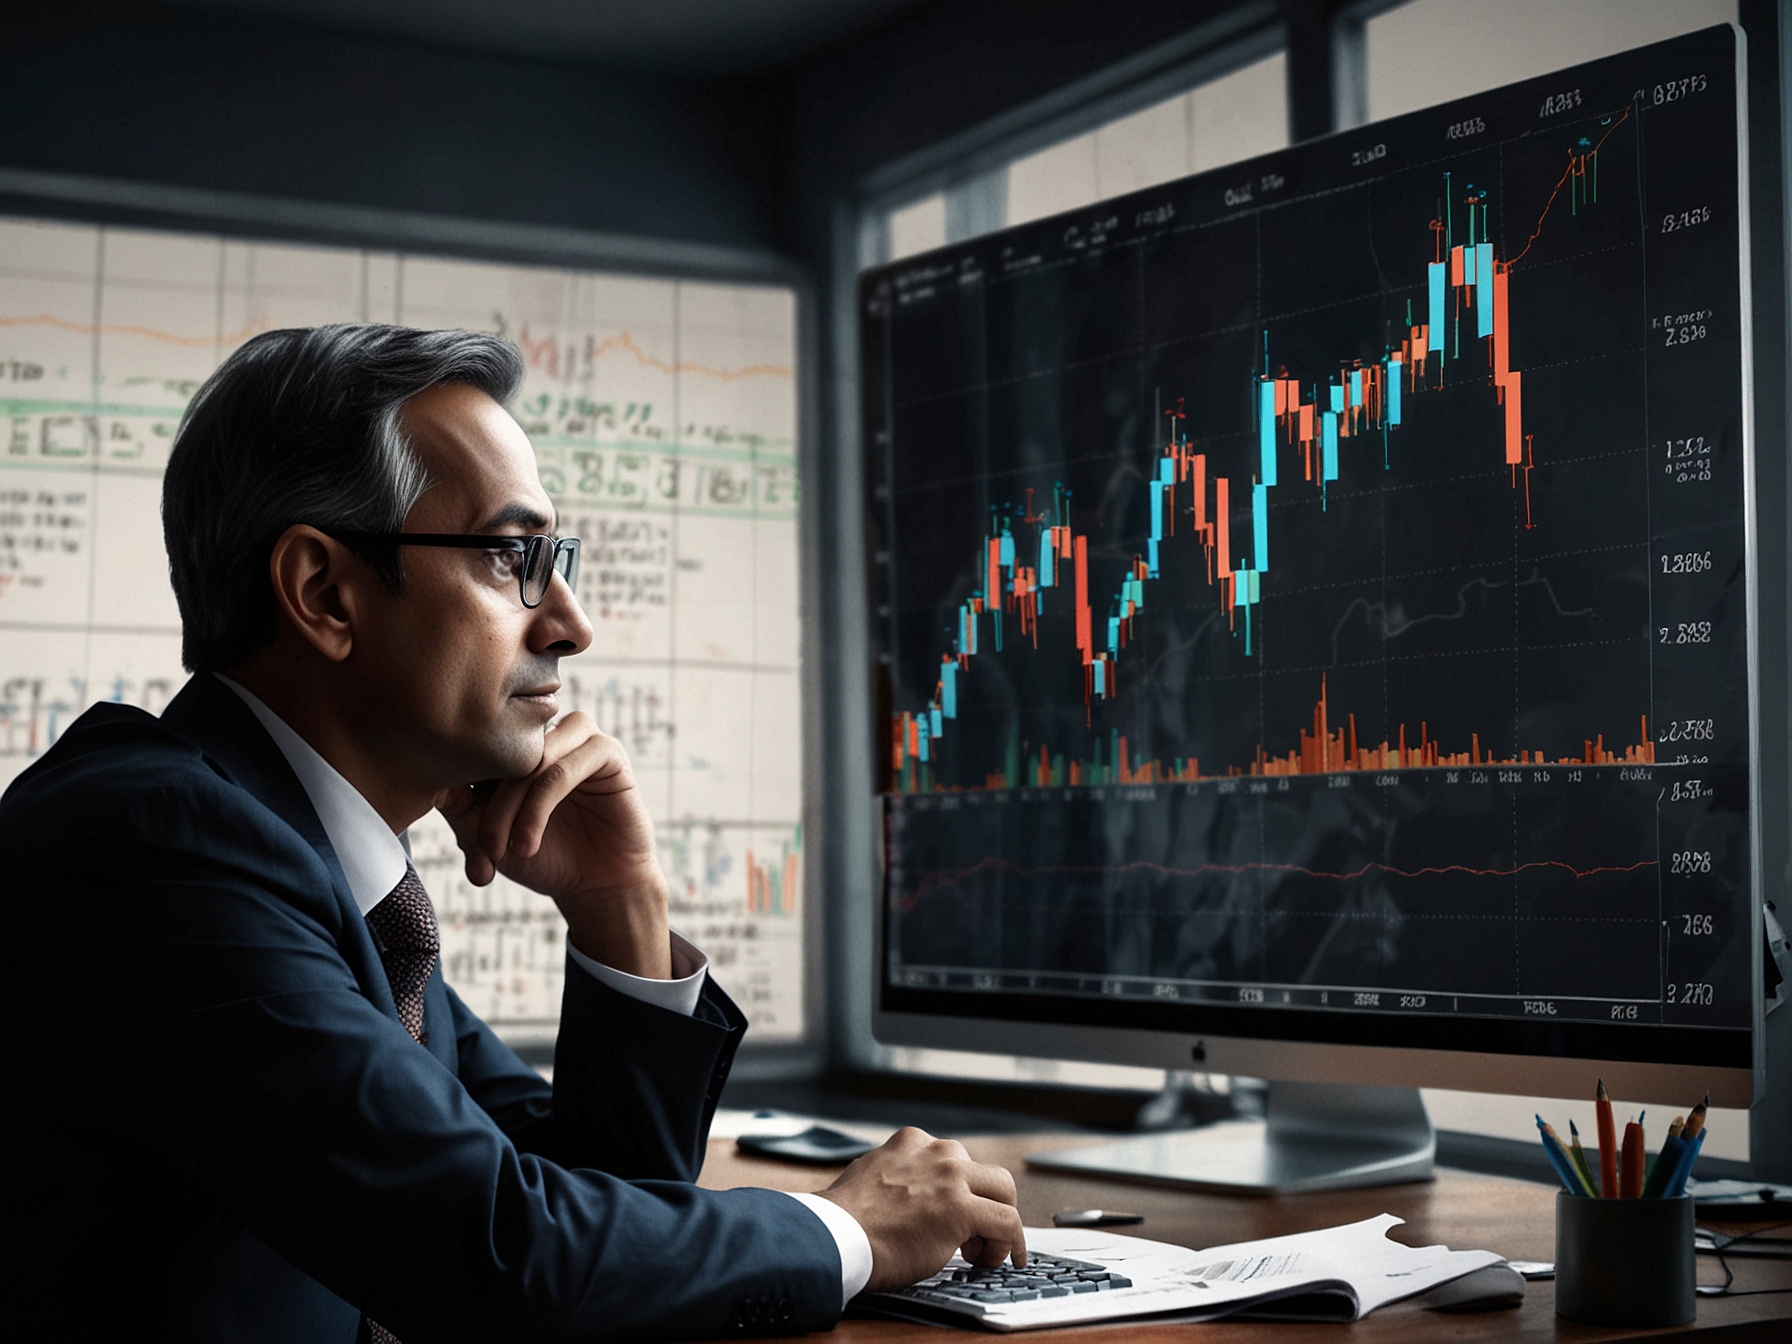 An investor analyzing a stock market chart showing the performance of Nifty 50 and Sensex indices, reflecting the predicted cautious start due to global and domestic influences.